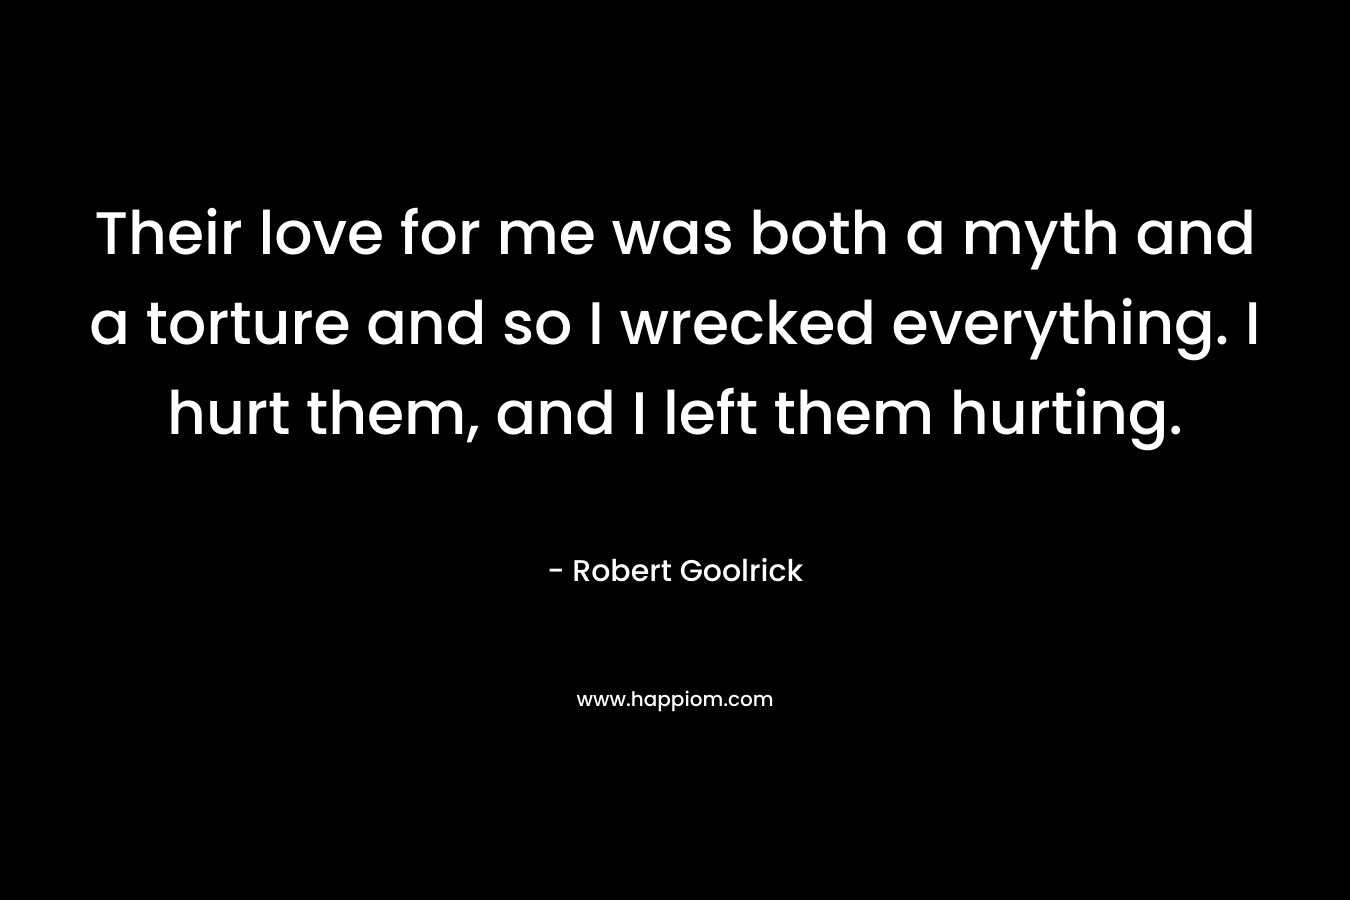 Their love for me was both a myth and a torture and so I wrecked everything. I hurt them, and I left them hurting. – Robert Goolrick